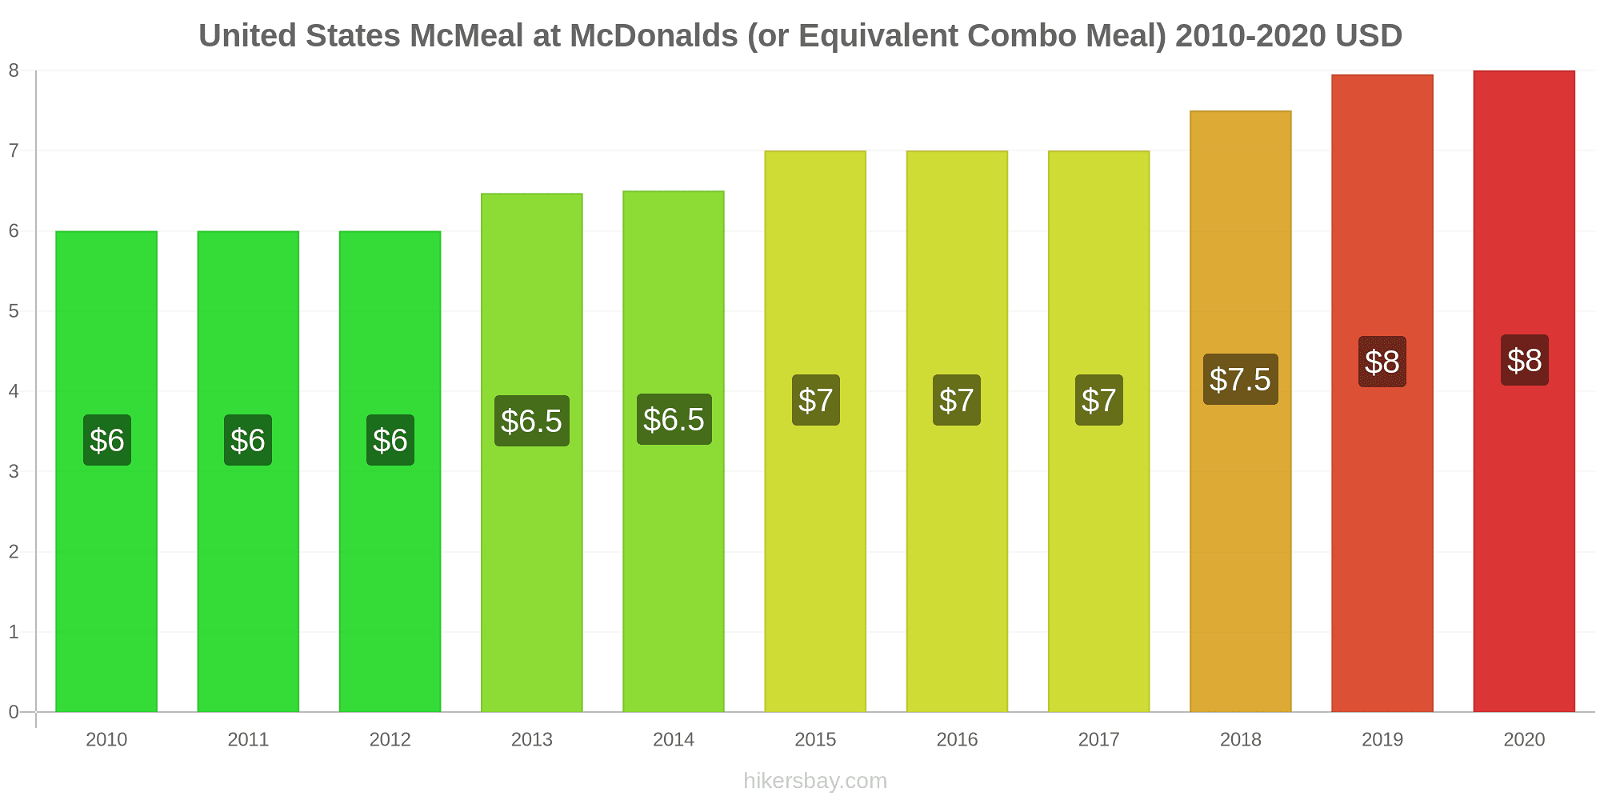 United States price changes McMeal at McDonalds (or Equivalent Combo Meal) hikersbay.com